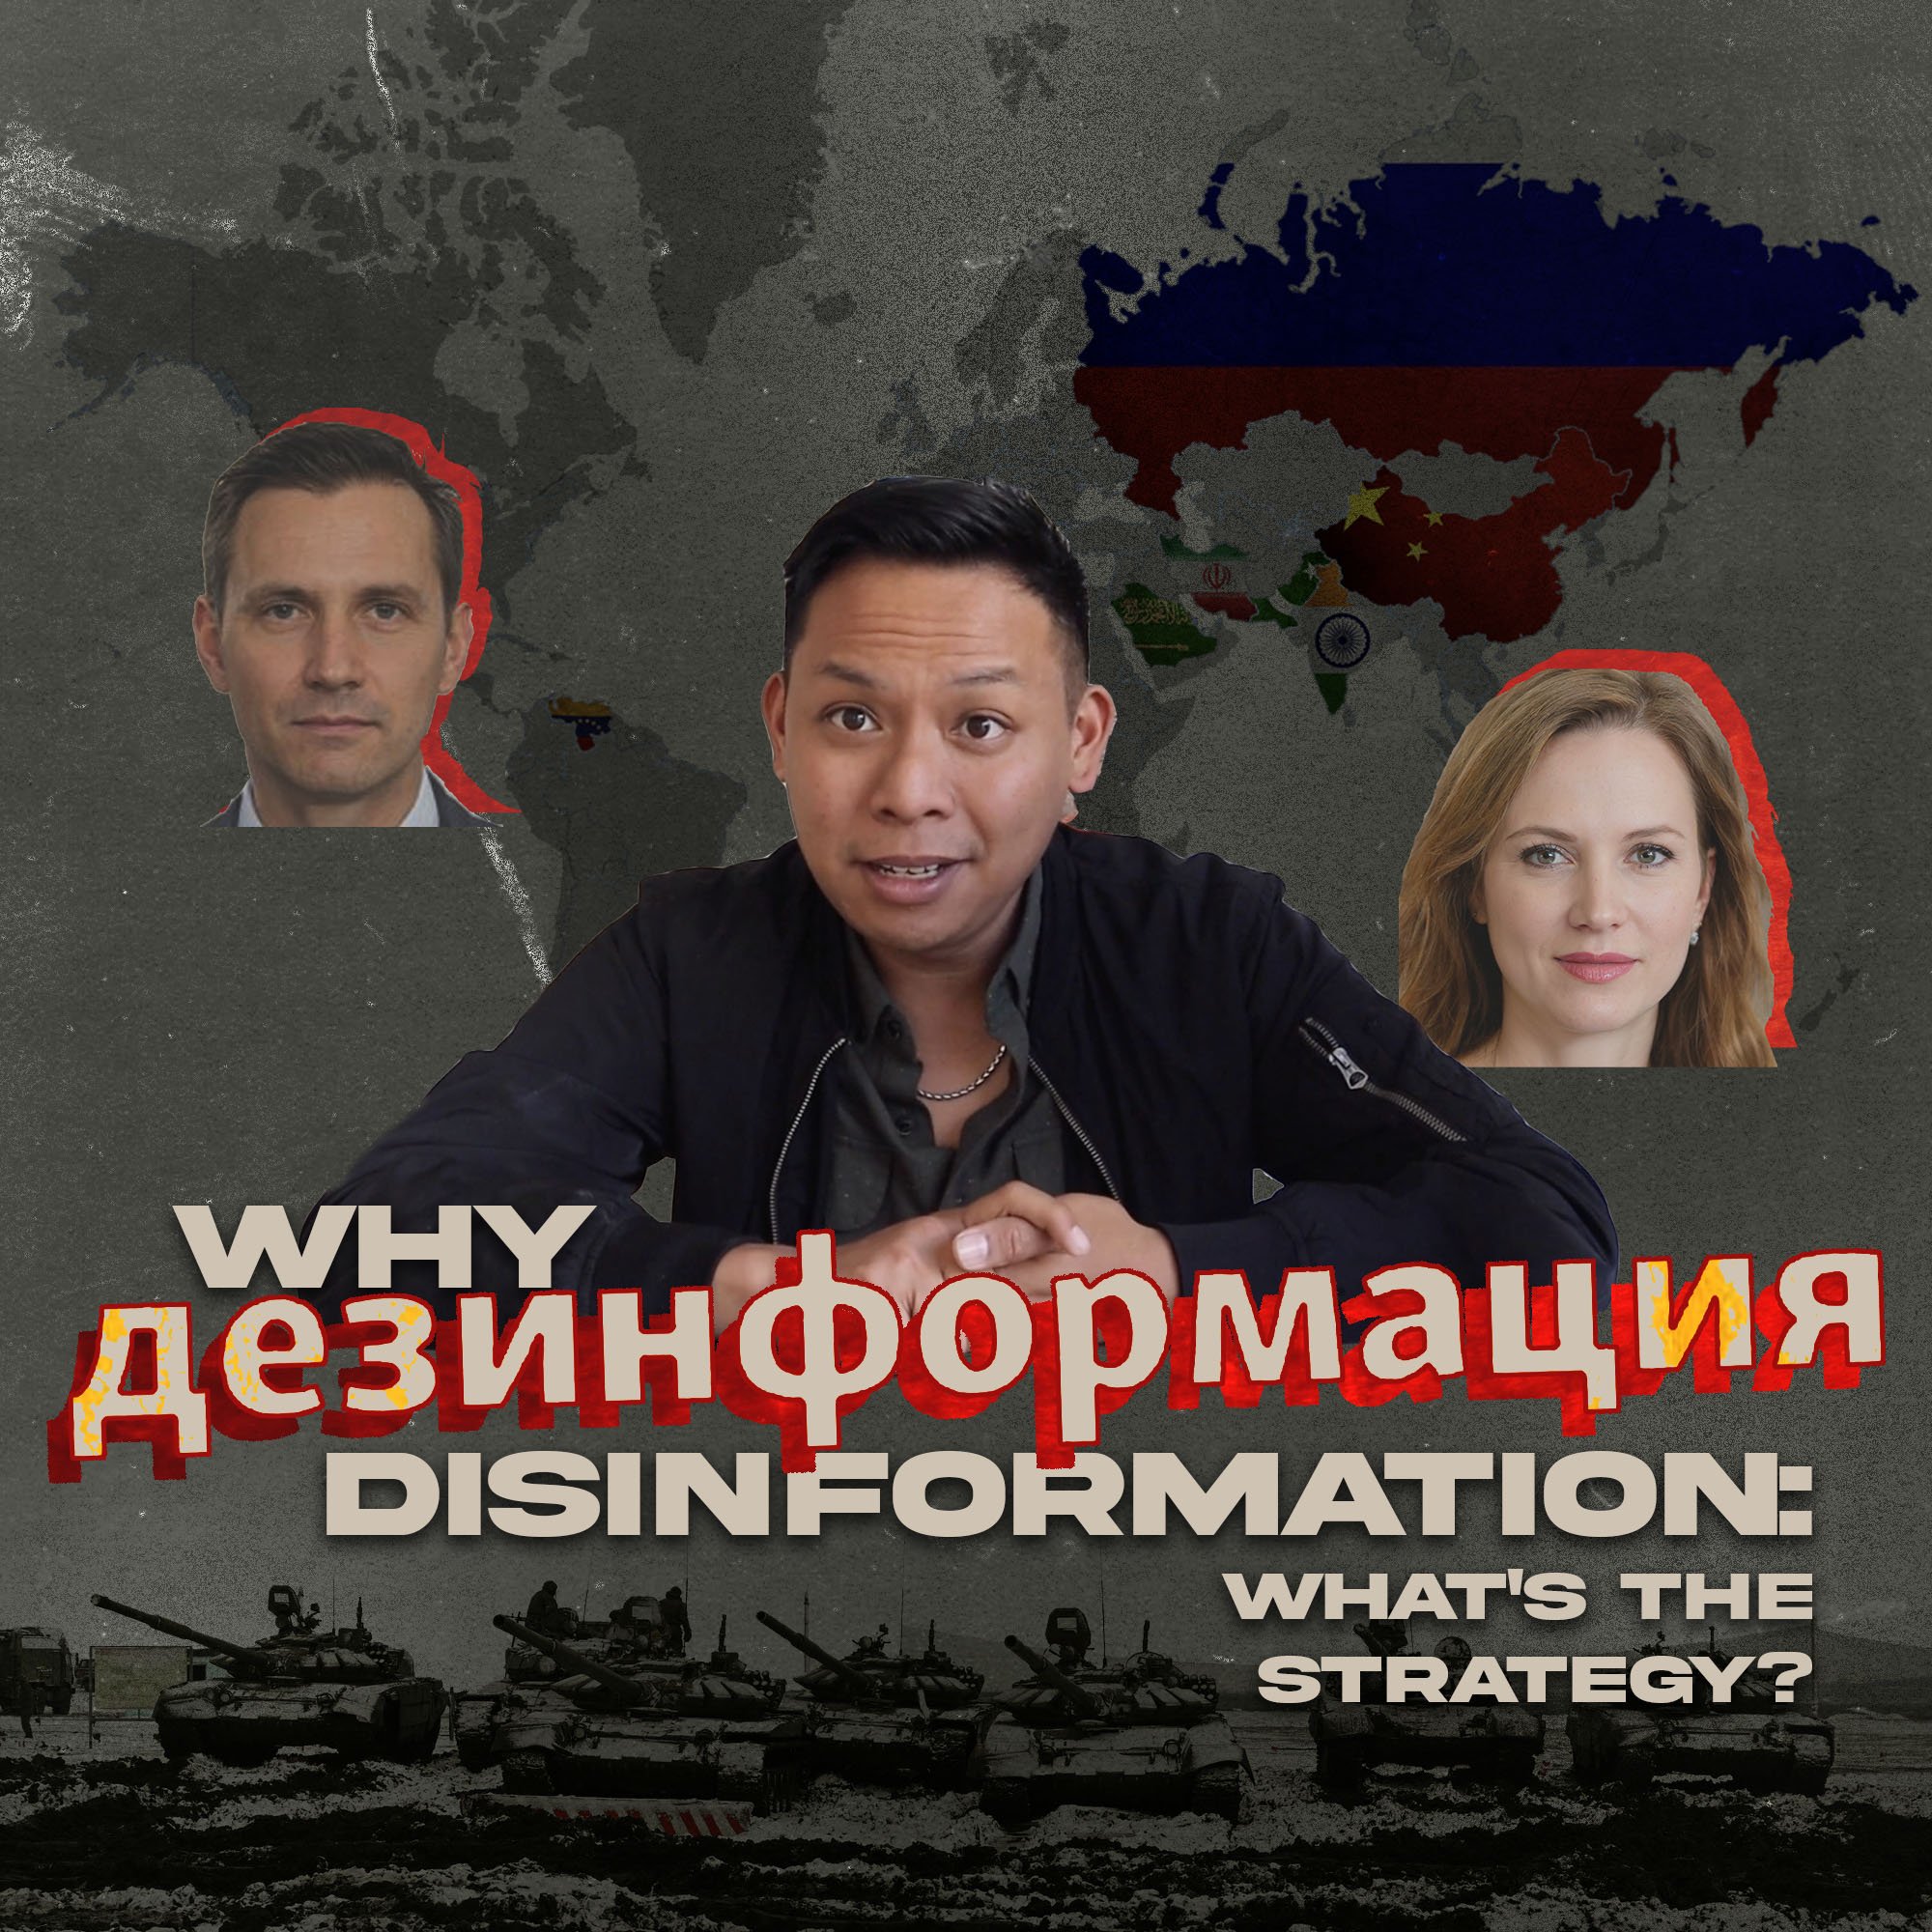 Russia's Disinformation Strategy